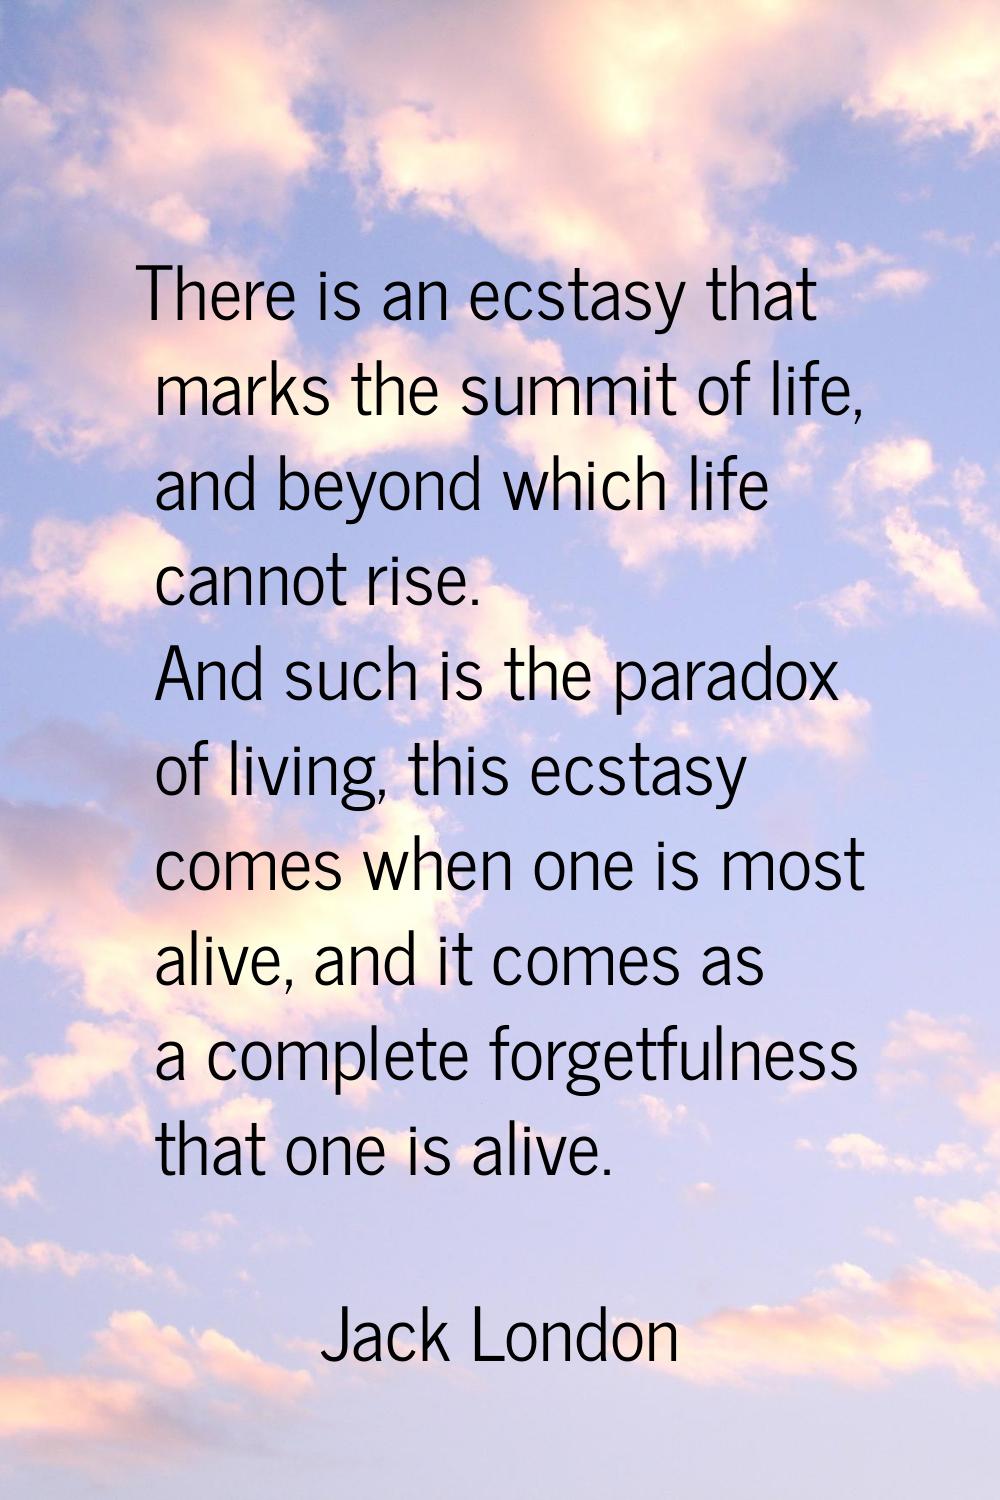 There is an ecstasy that marks the summit of life, and beyond which life cannot rise. And such is t